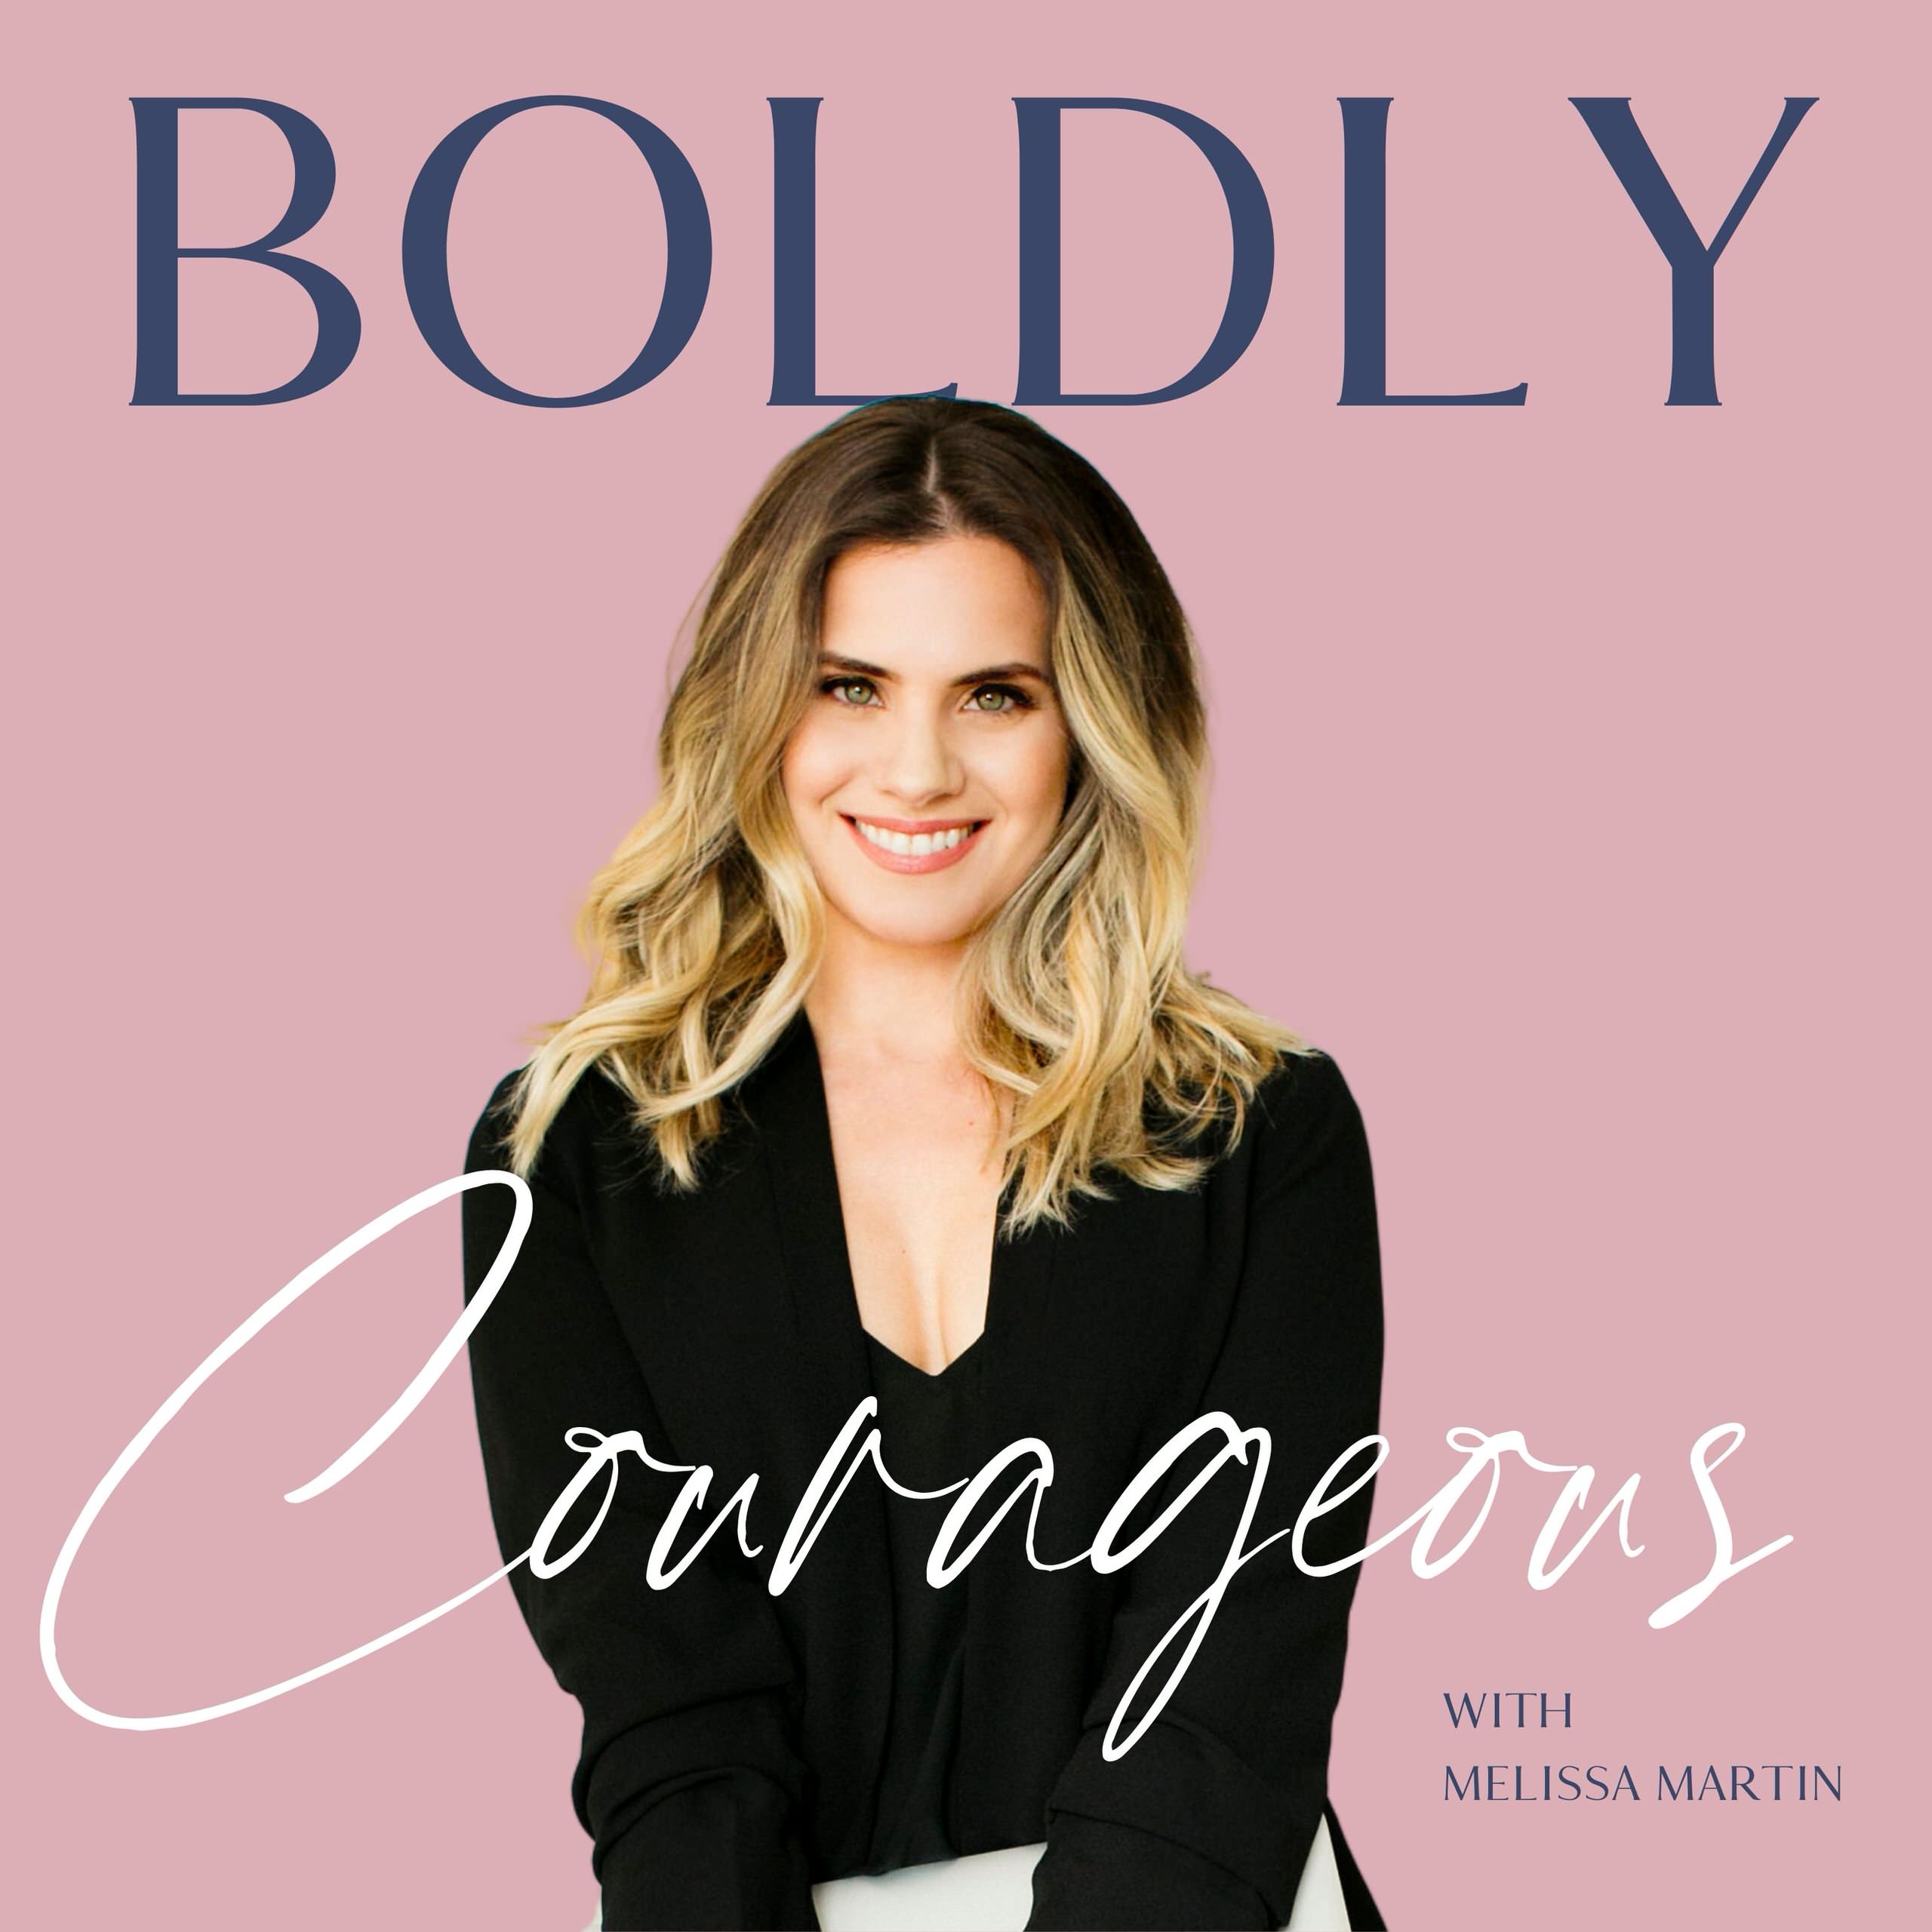 https://boldlycourageous.podbean.com/e/investing-before-youre-ready-creating-a-home-space-you-love-with-desiree-washington/